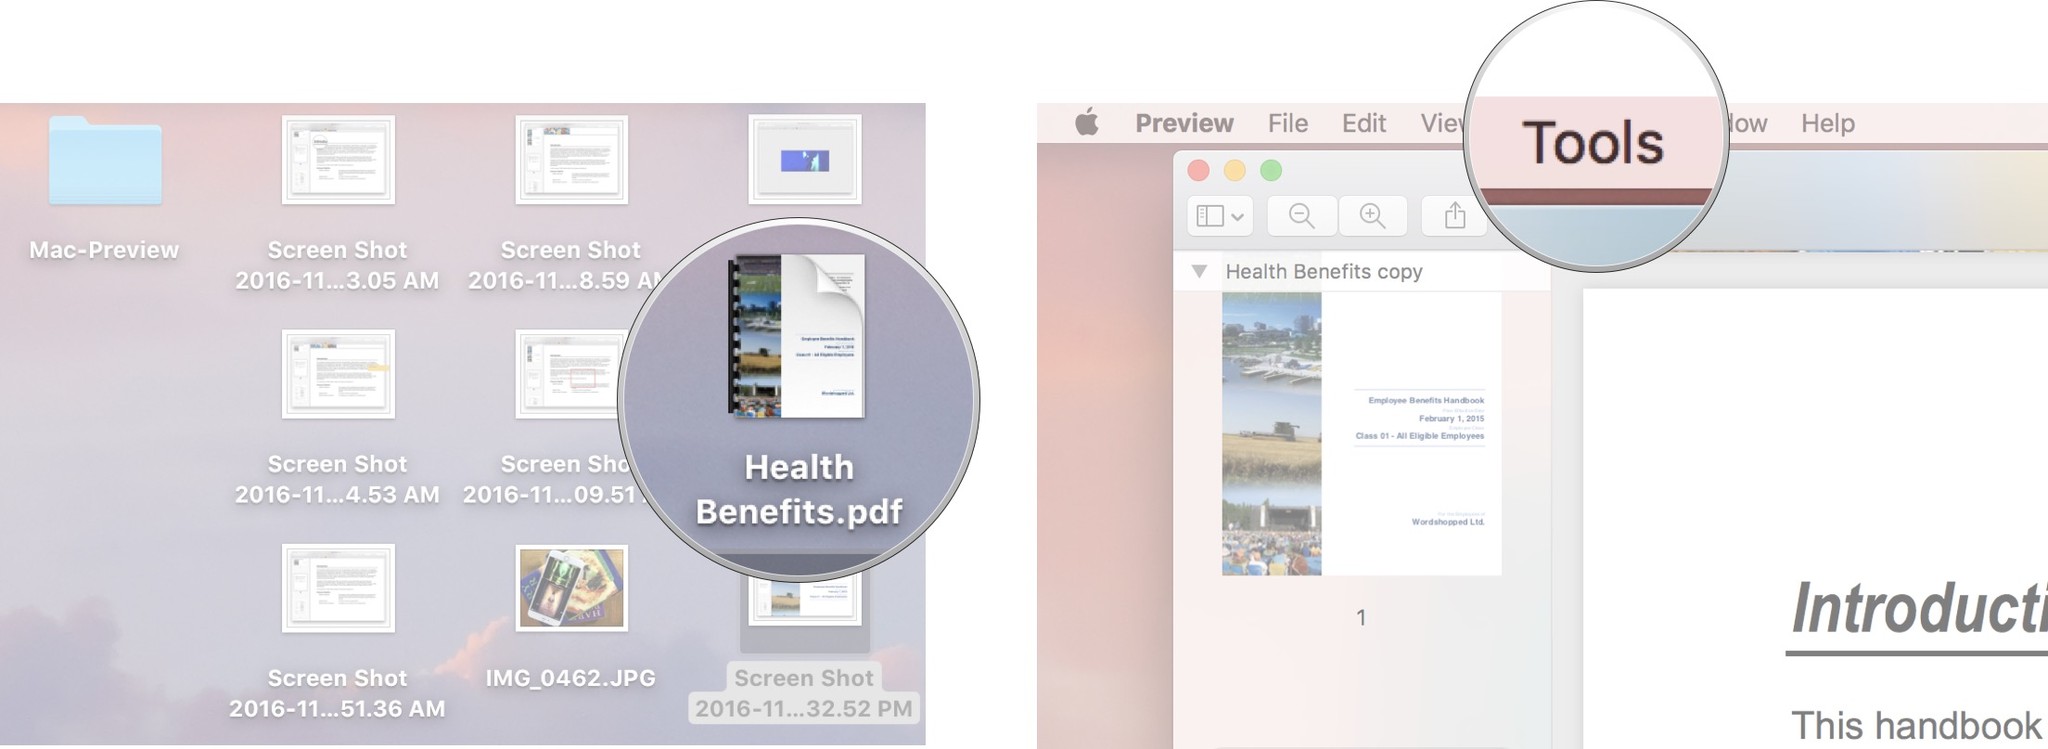 Open the file you want to annotate in Preview and then click Tools from the top menu bar.